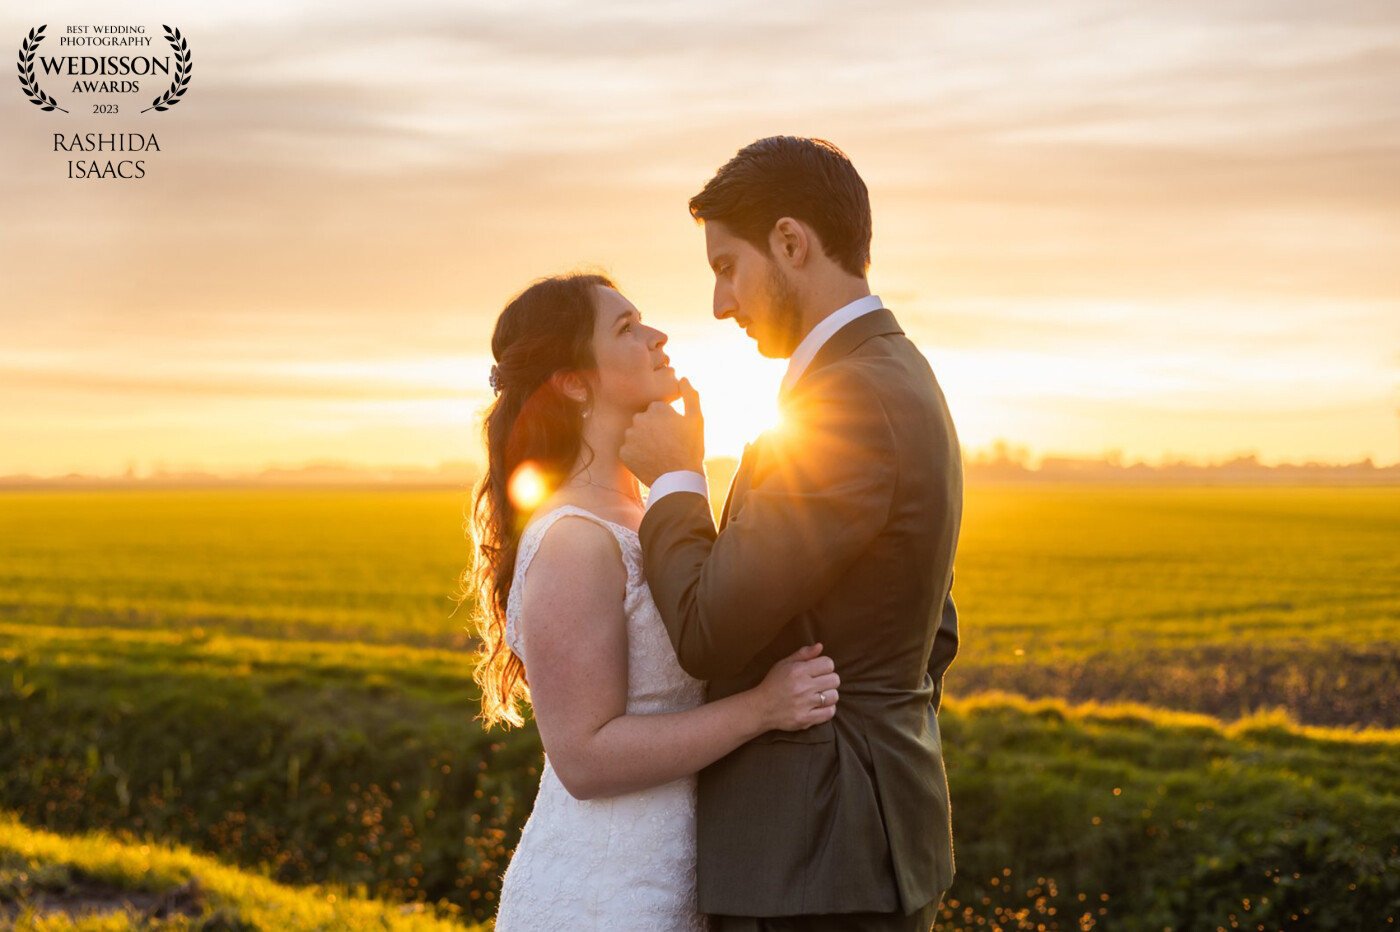 When a single picture captures the strength of love. The Golden Hour is just a bonus to this picture.